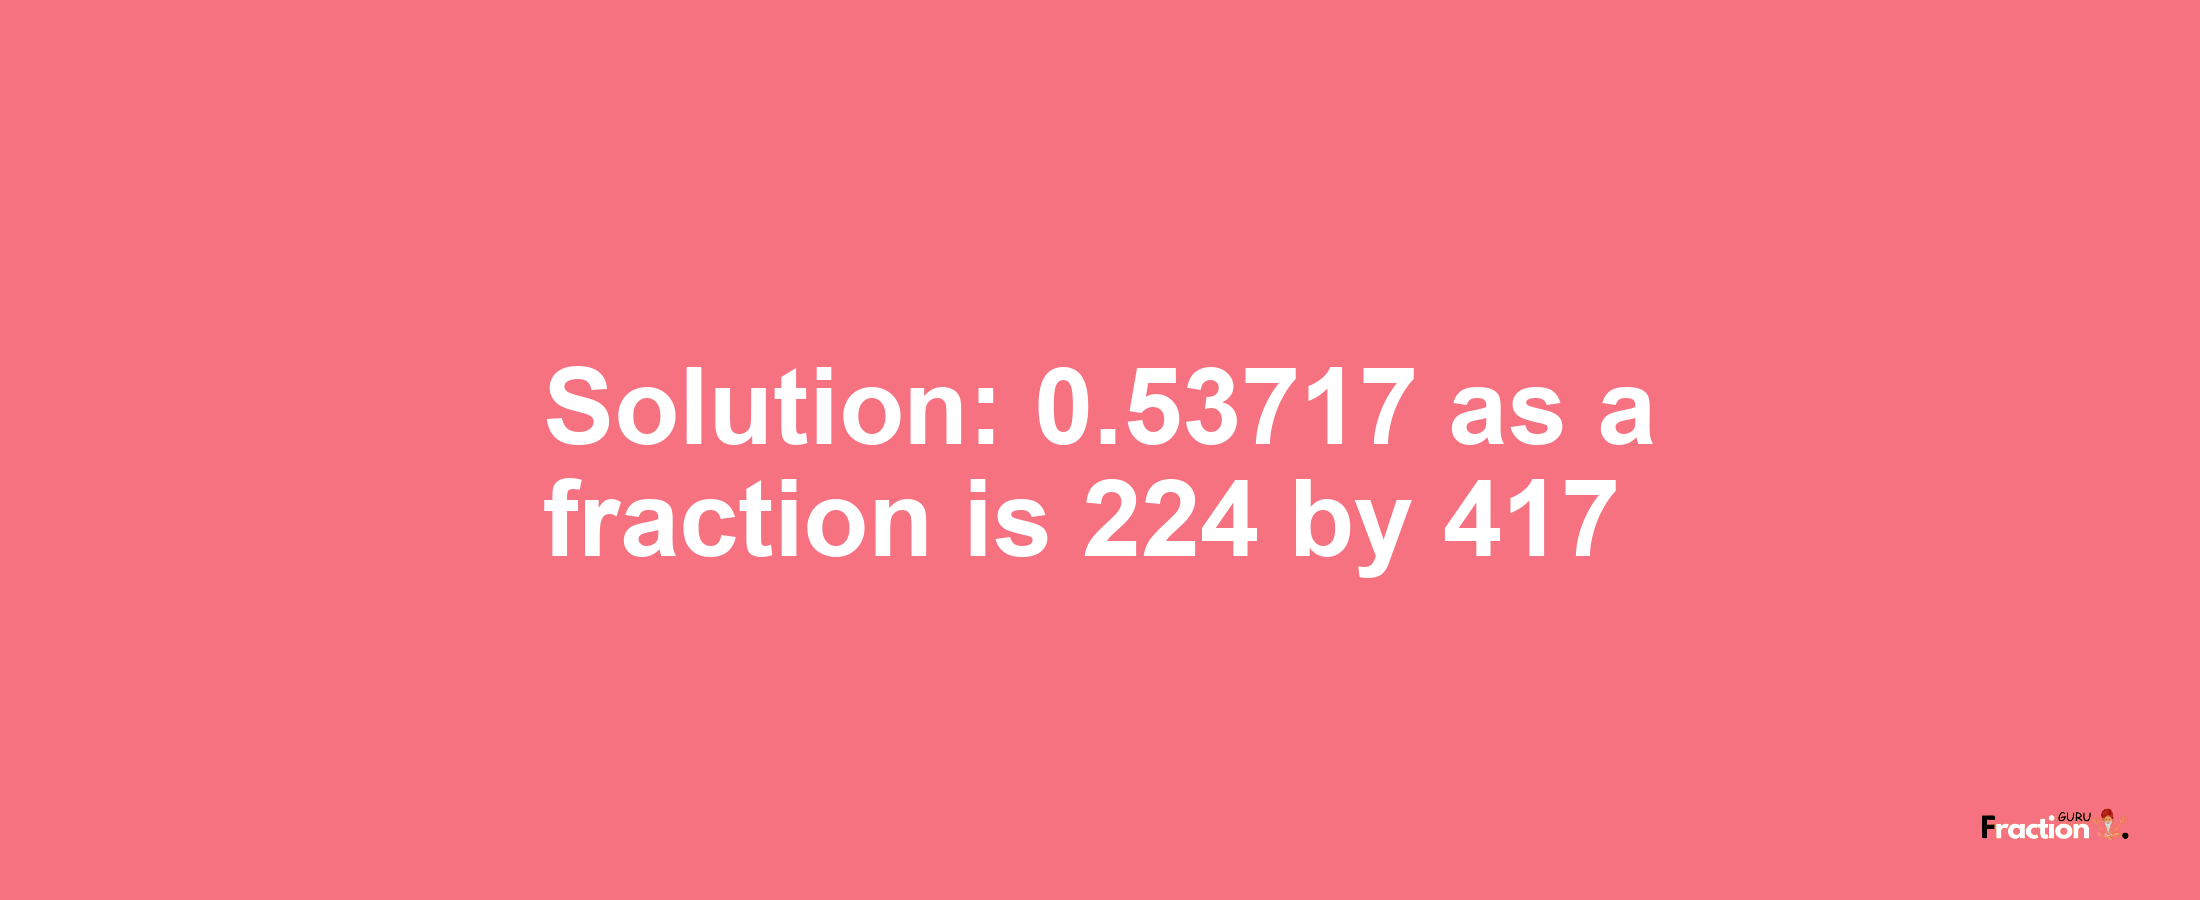 Solution:0.53717 as a fraction is 224/417